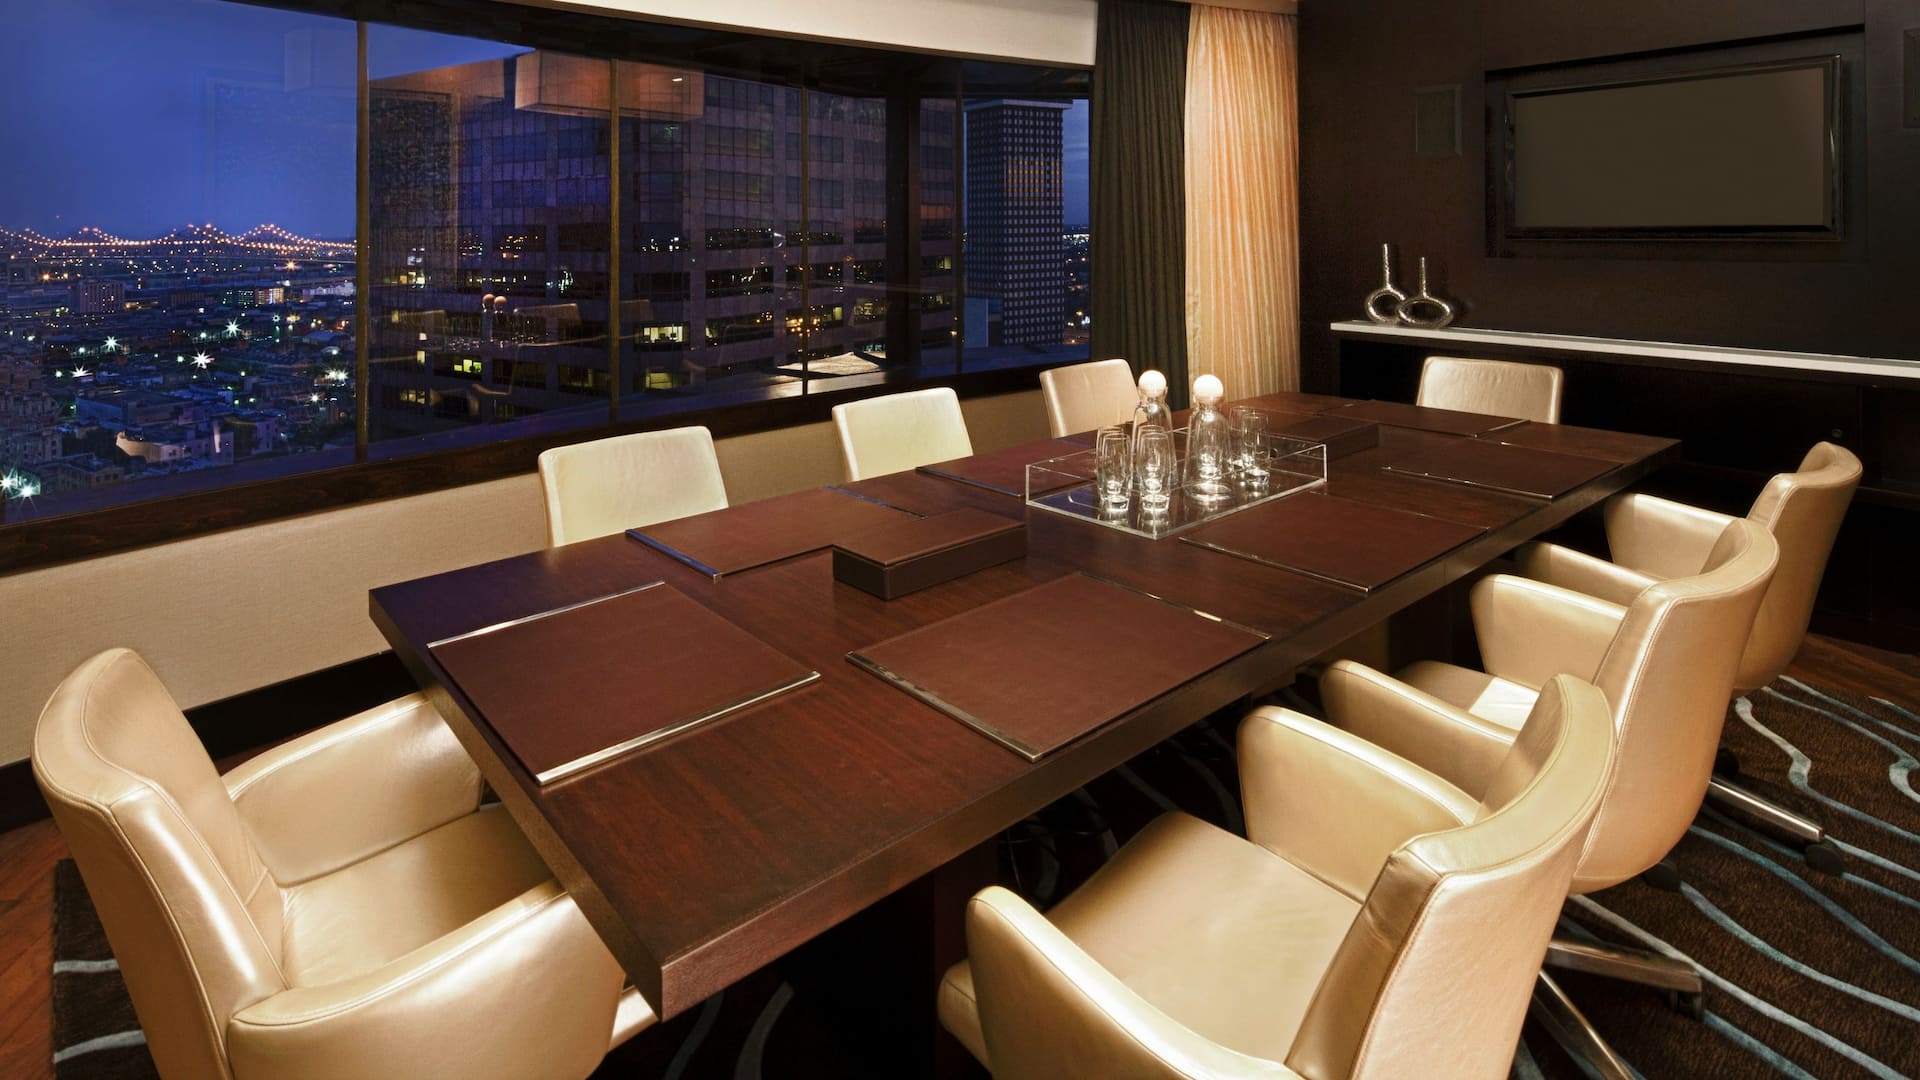 Meeting venue with views of the French Quarter in New Orleans